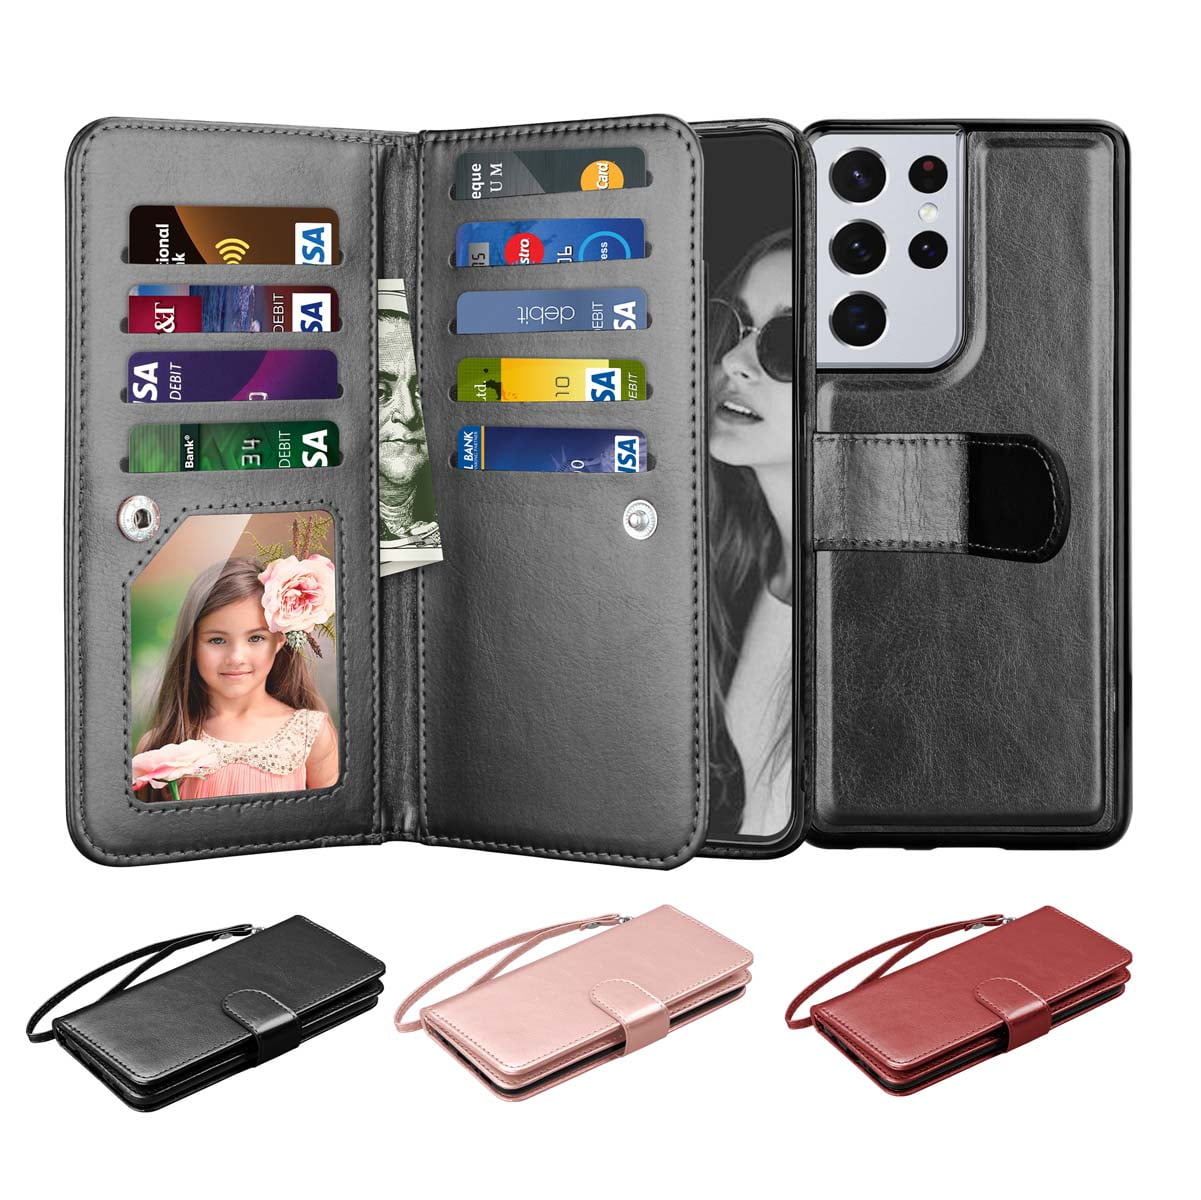 Cover for Leather Kickstand Wallet case Luxury Business Card Holders Flip Cover Samsung Galaxy S10 Flip Case 